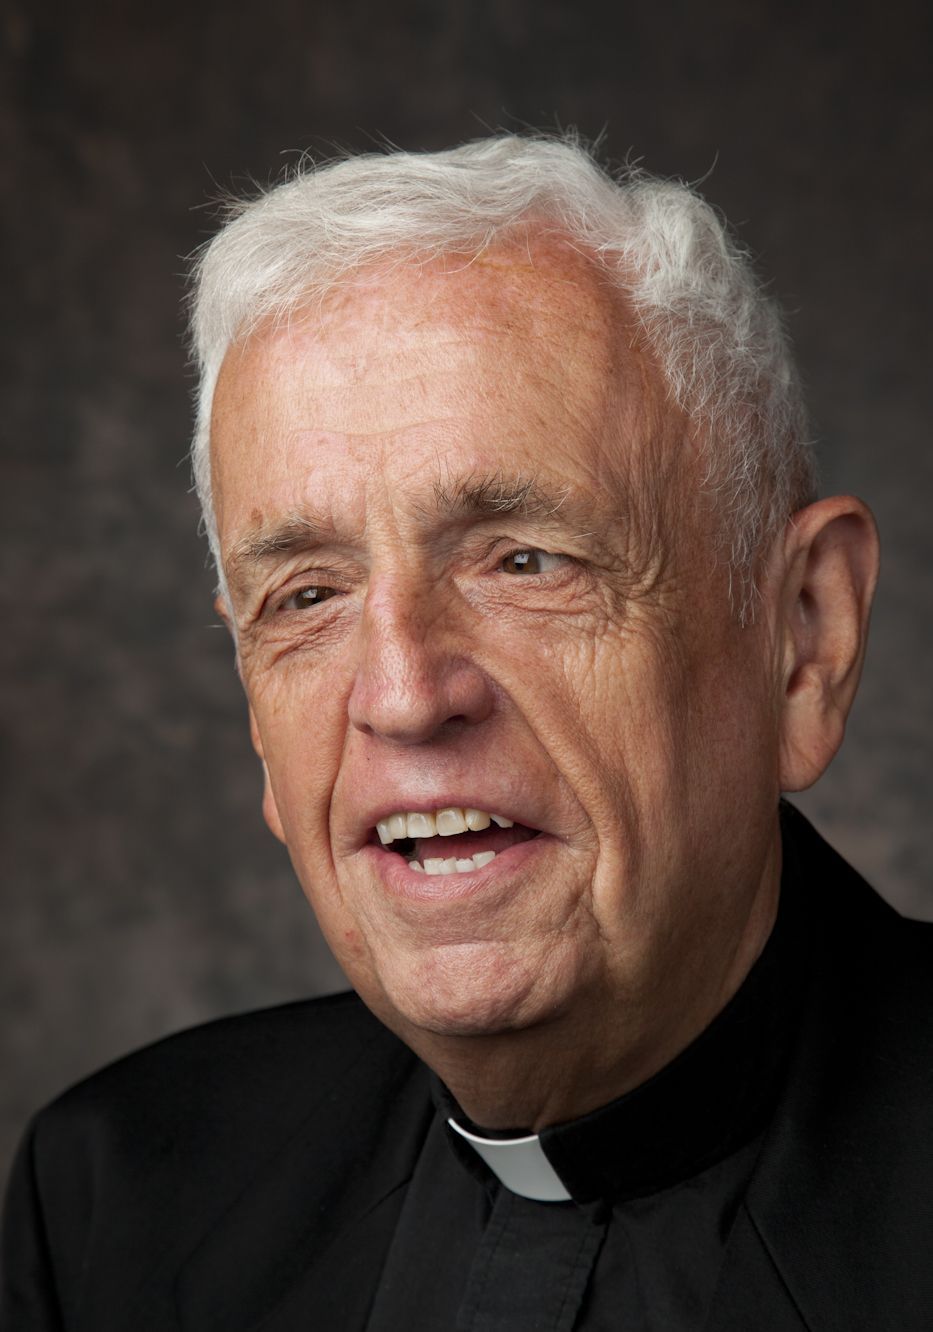 Head shot of Father Larry smiling in a black shirt and collar